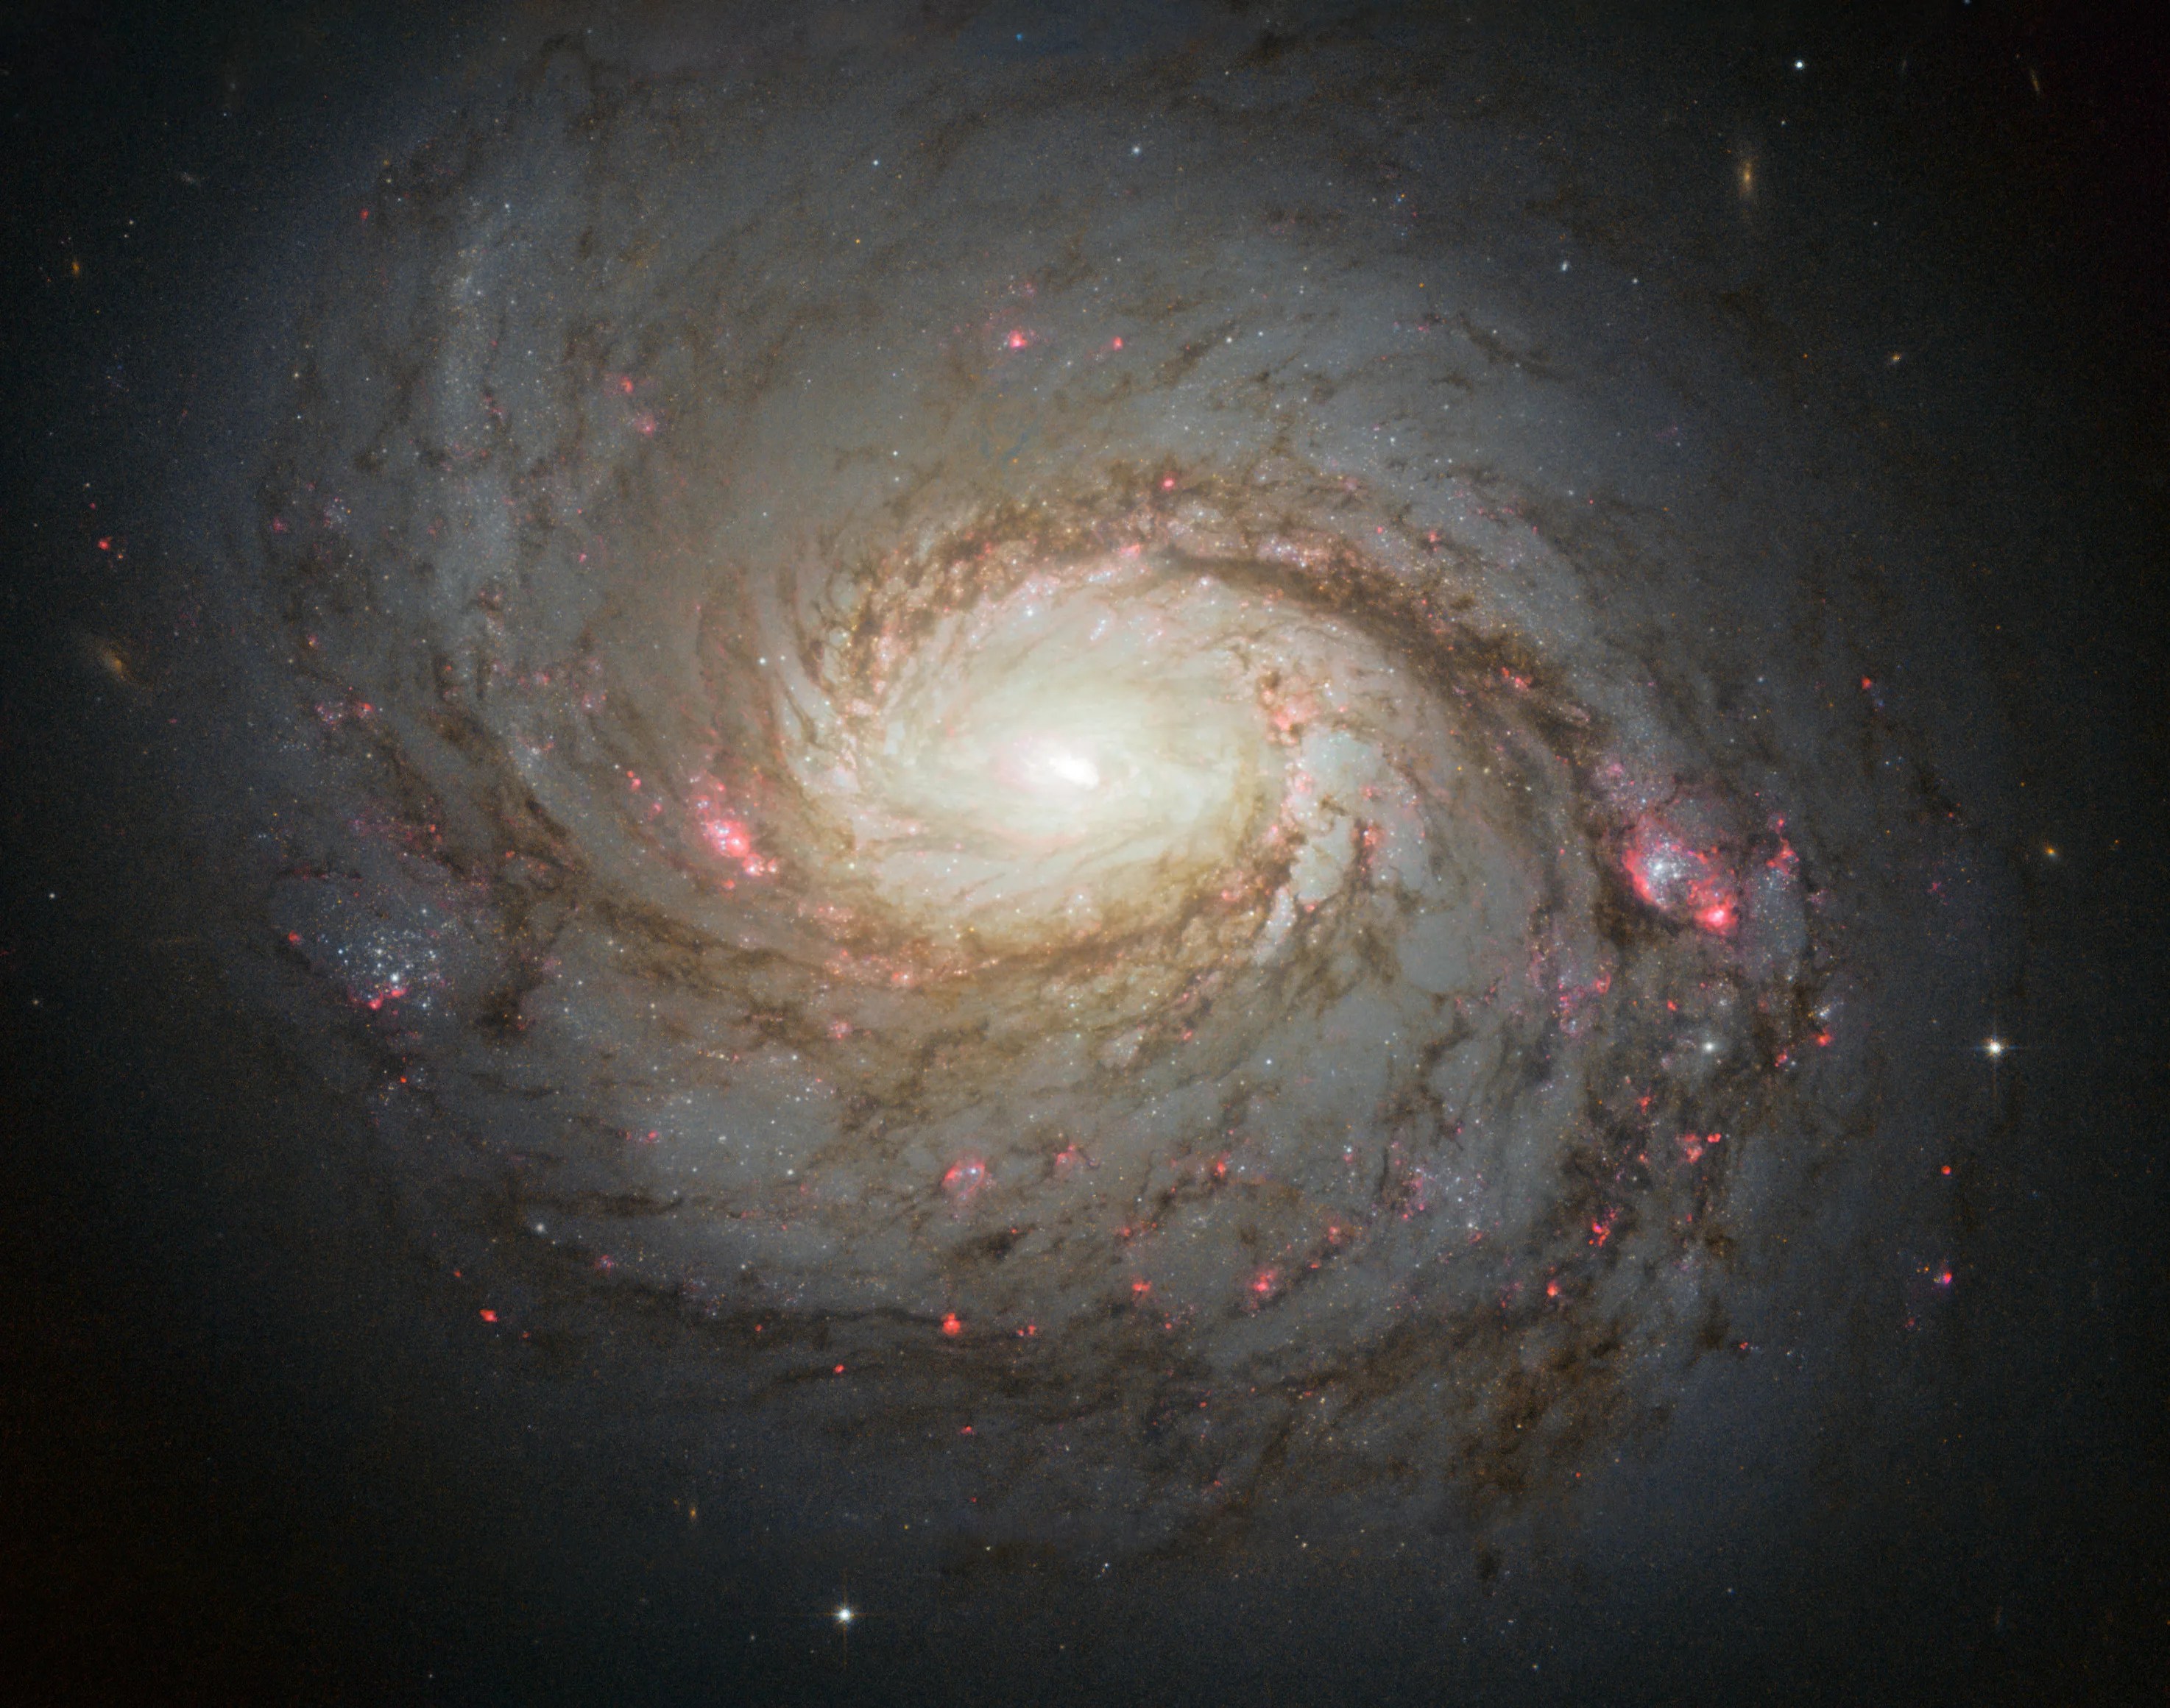 A bright spiral galaxy with a yellow core shines at the center, surrounded by spiral arms laced through with dark dust and pink regions of star formation.